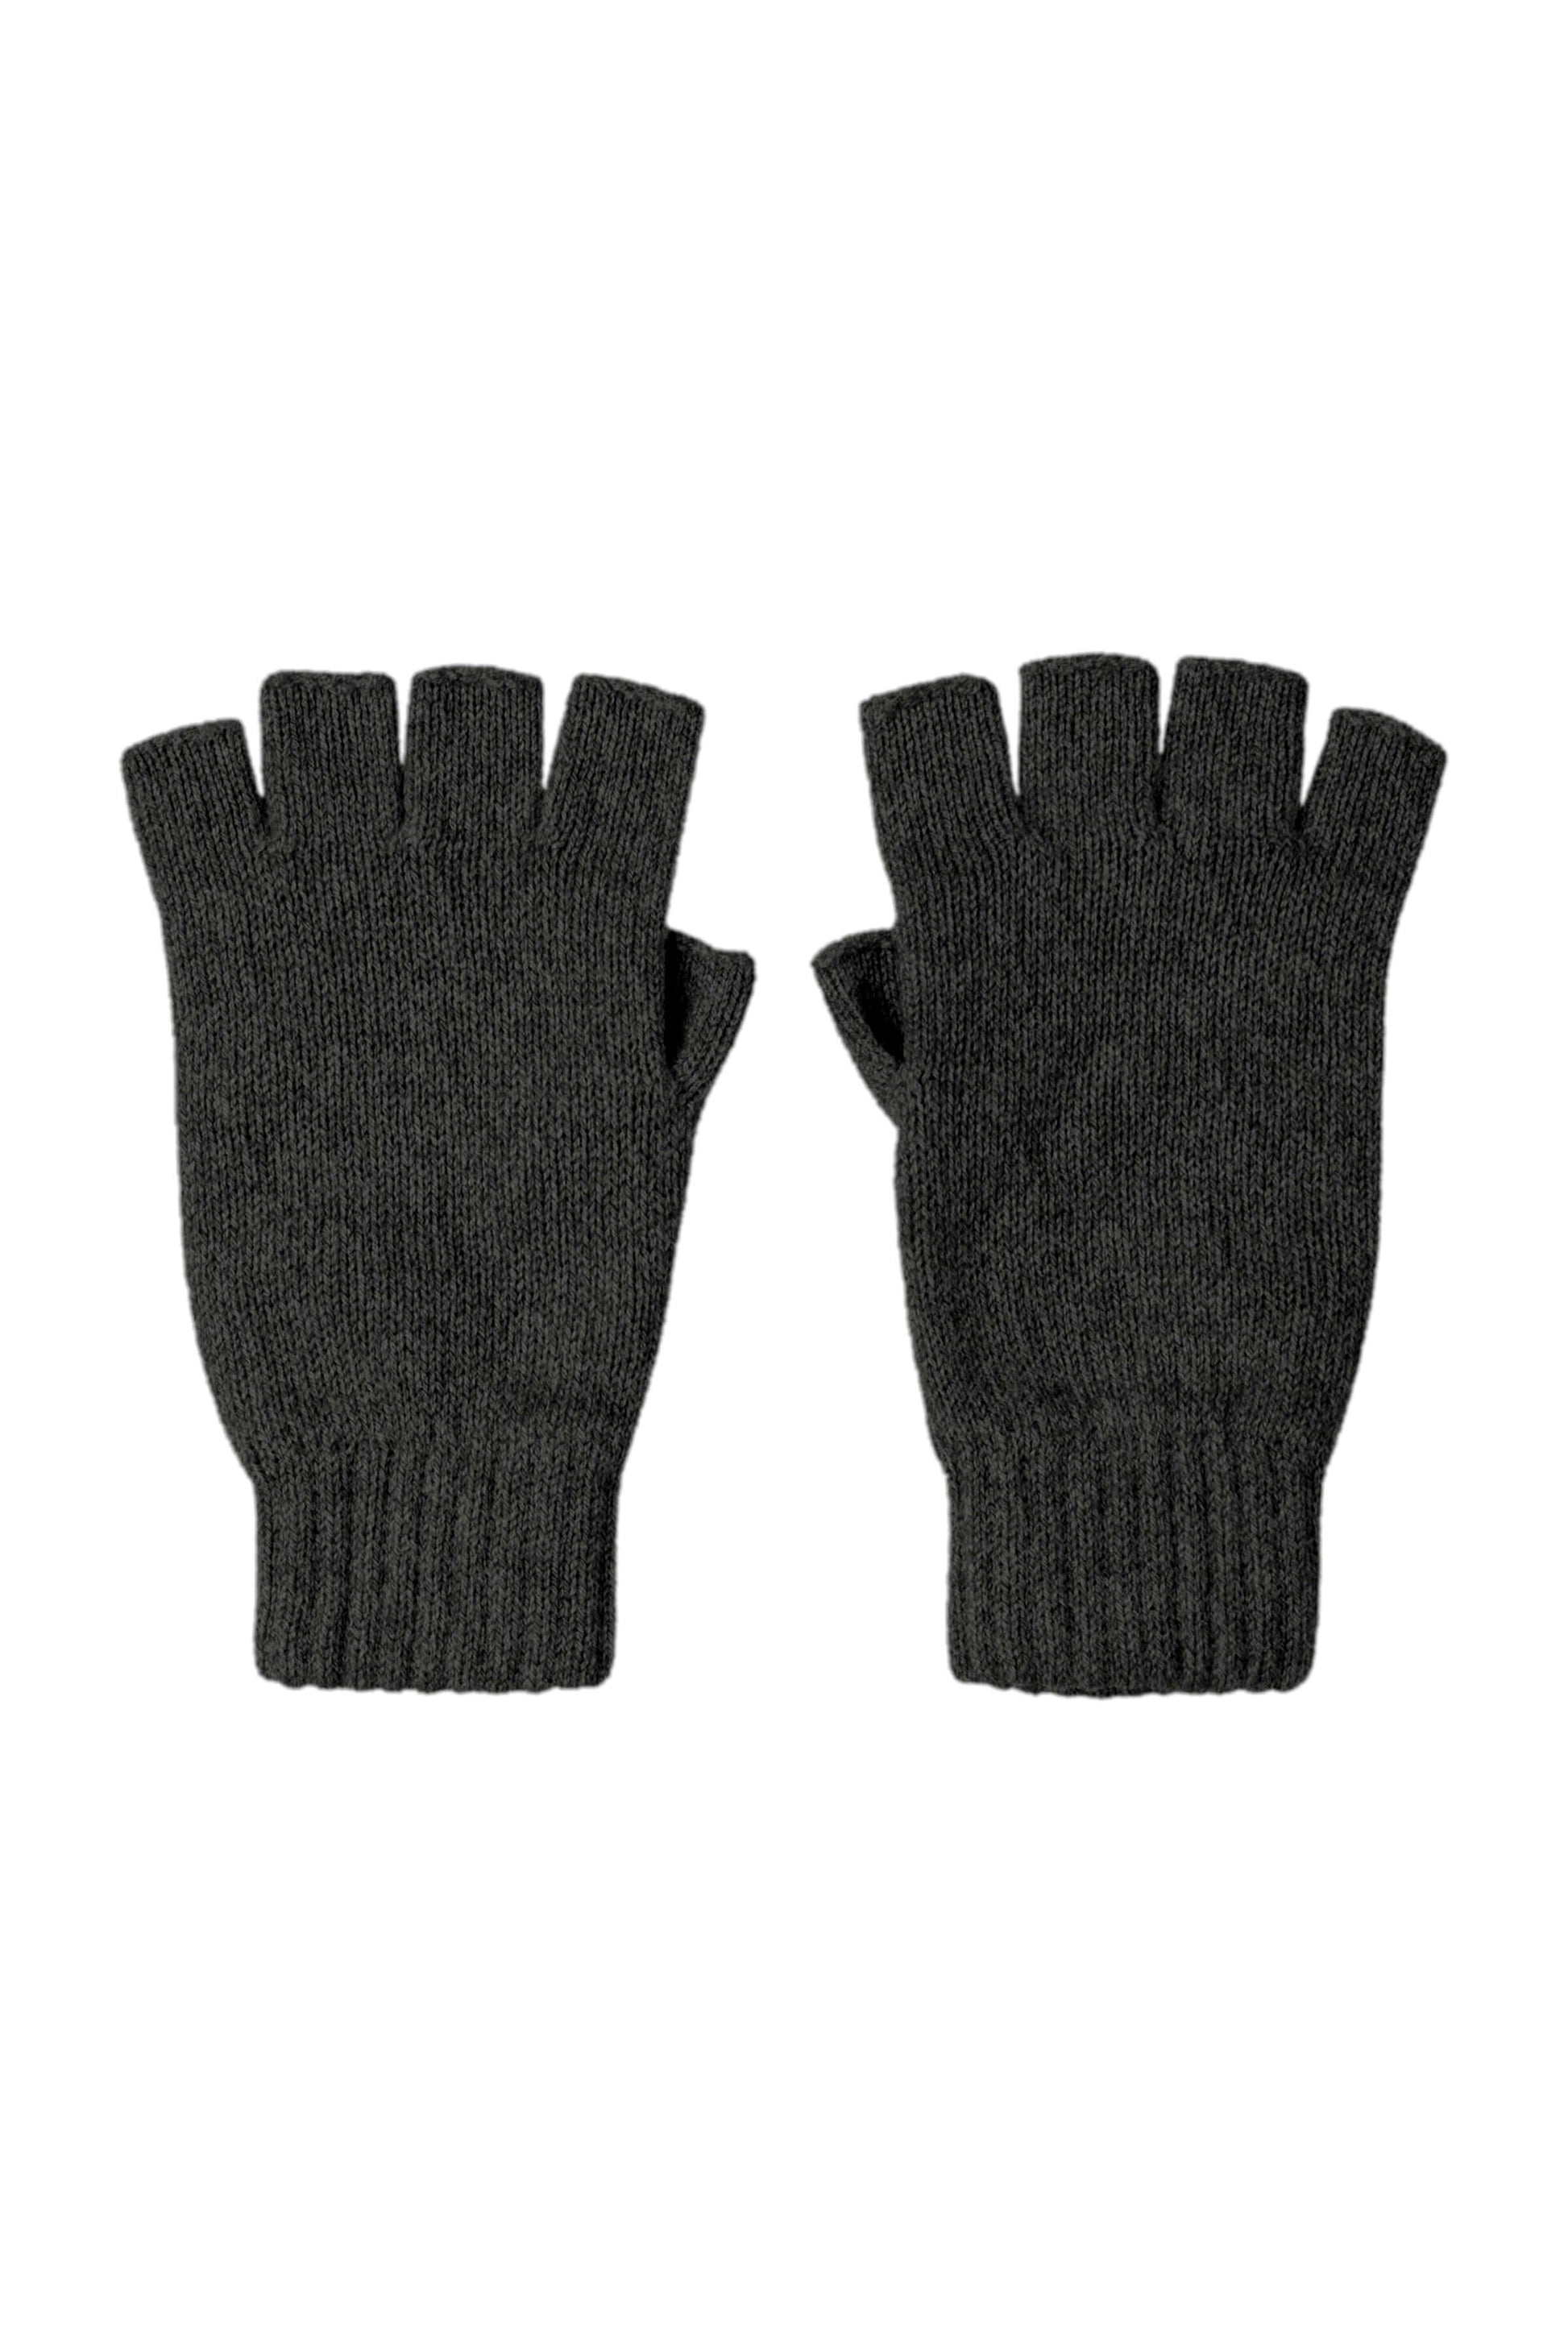 Johnstons of Elgin AW24 Knitted Accessory Mid Grey Women's Fingerless Cashmere Gloves HAY02223HA4181ONE